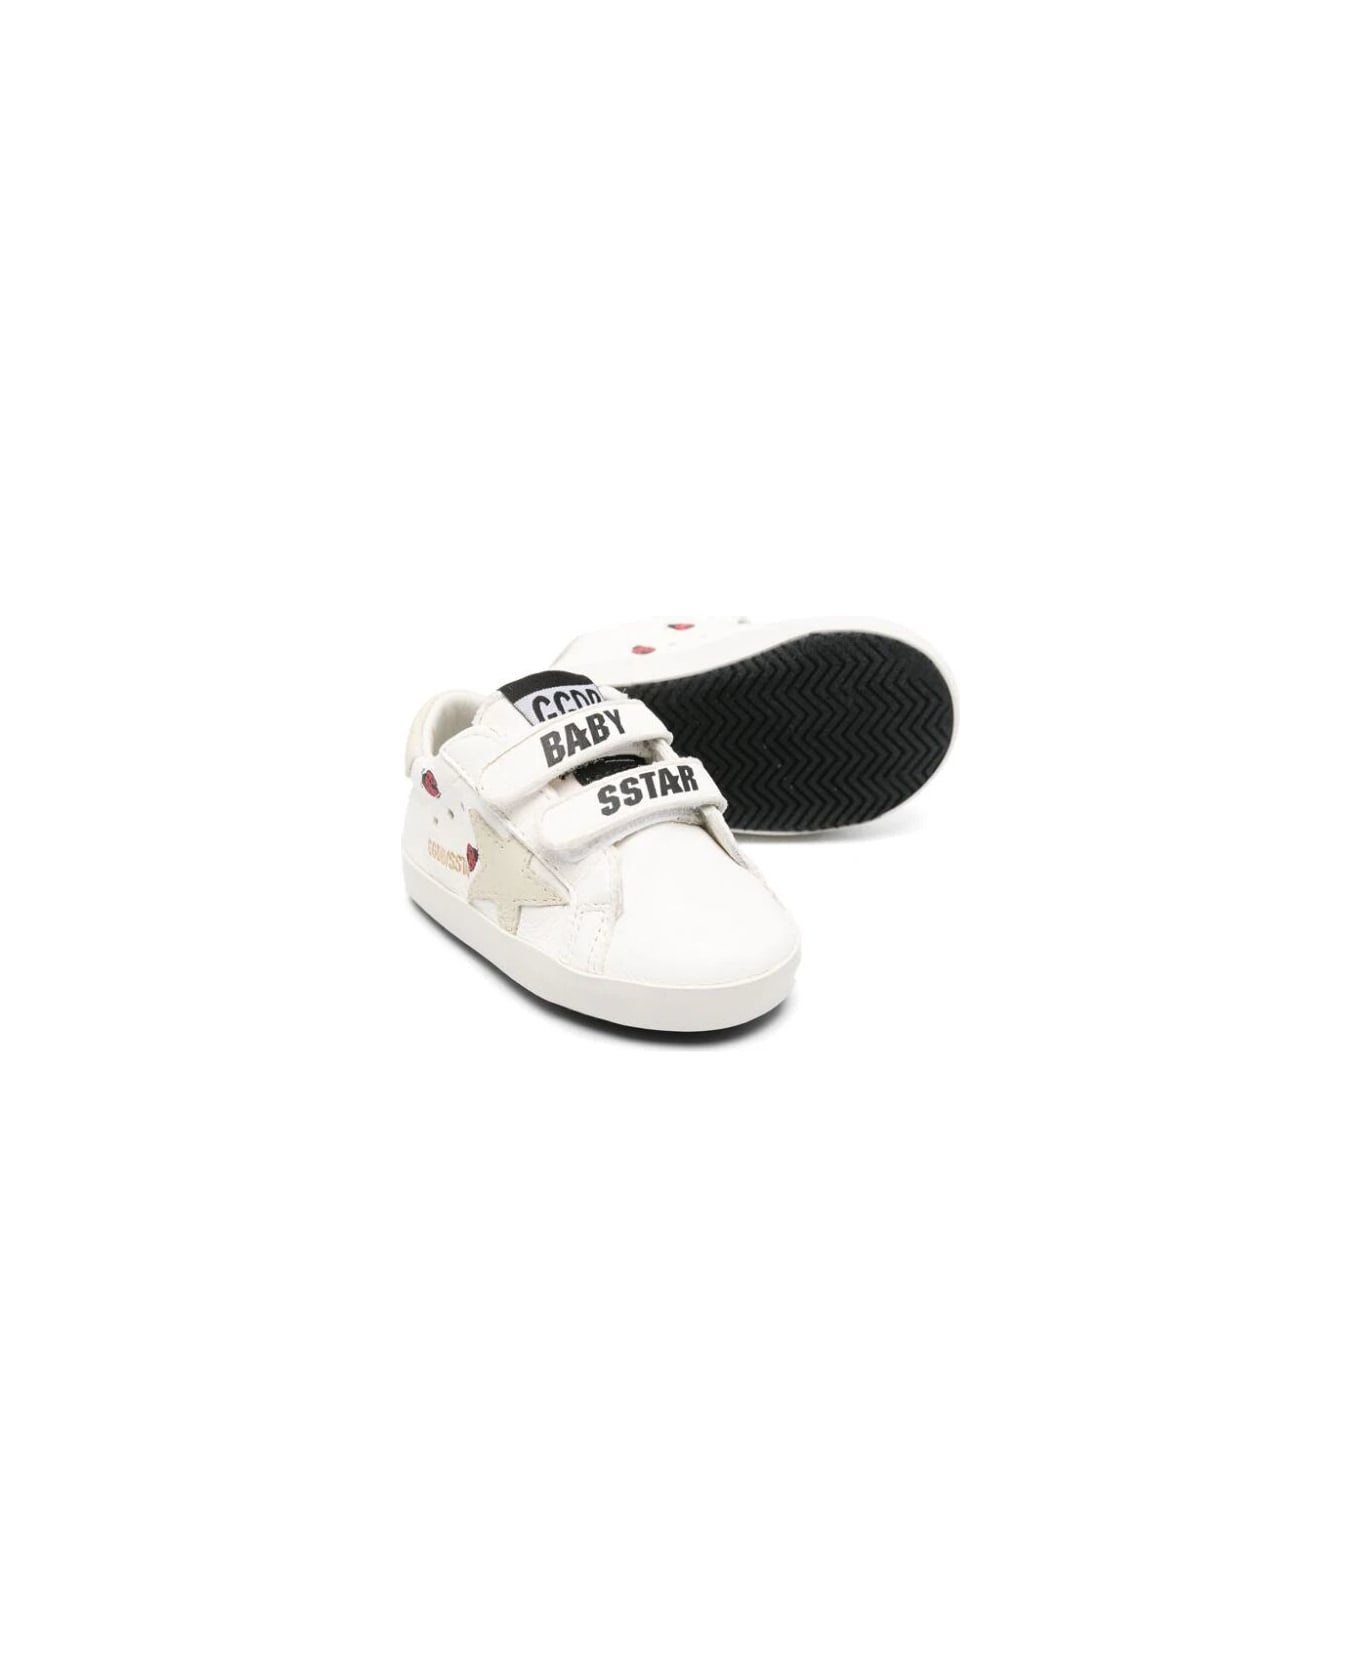 Golden Goose Baby School Nappa Upper With Prints Leather Star And Heel - White Ivory Red